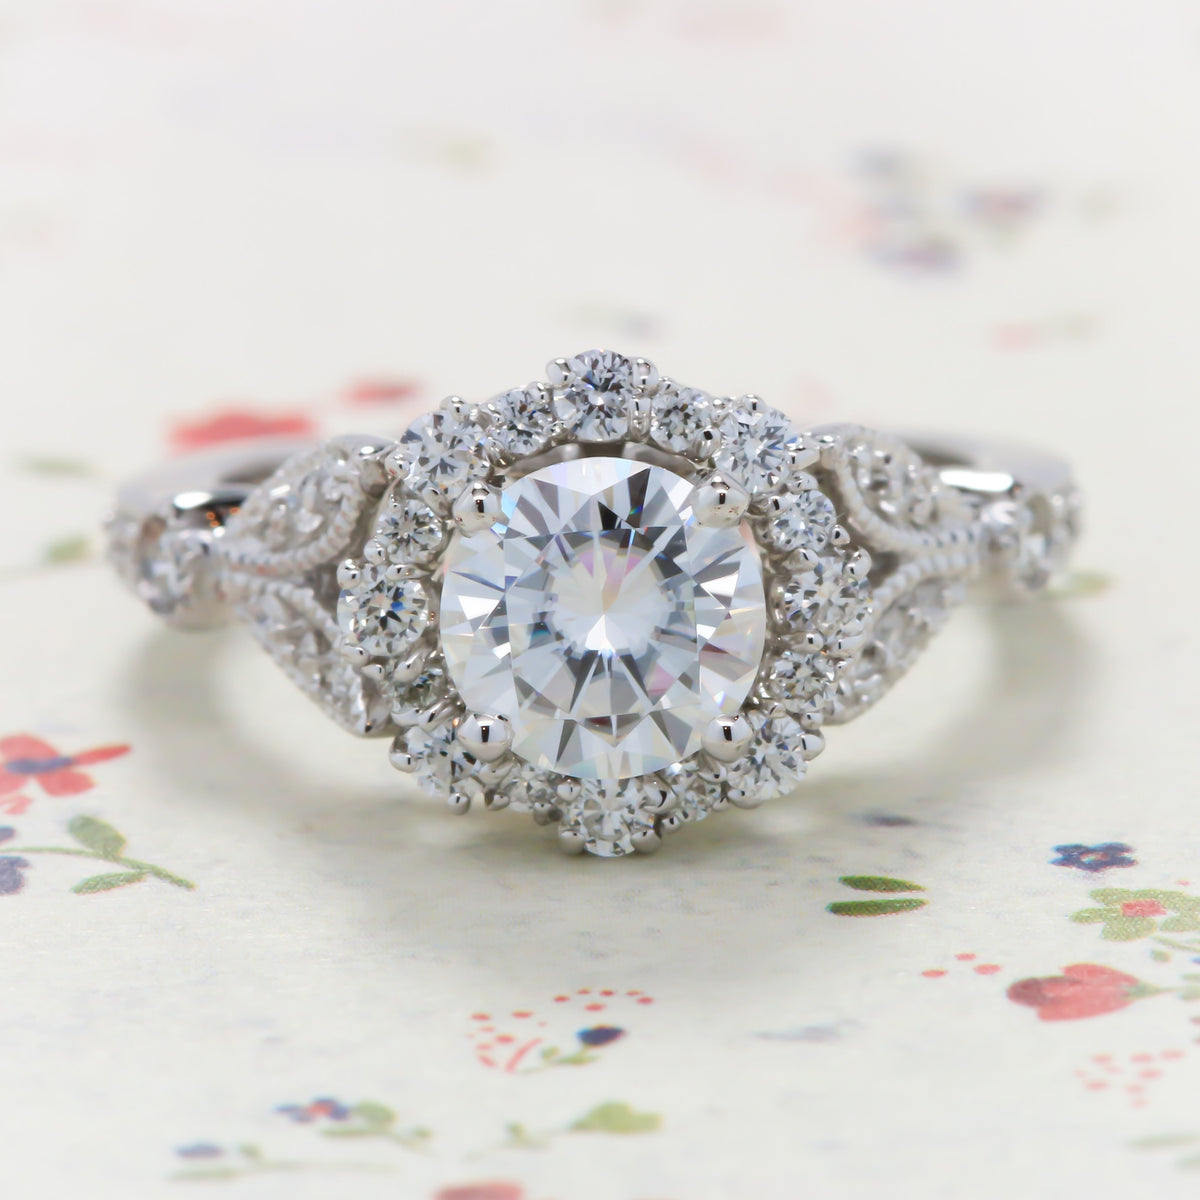 Vintage Floral Style Halo Diamond and Moissanite Engagement Ring - Lilly - Moissanite Rings